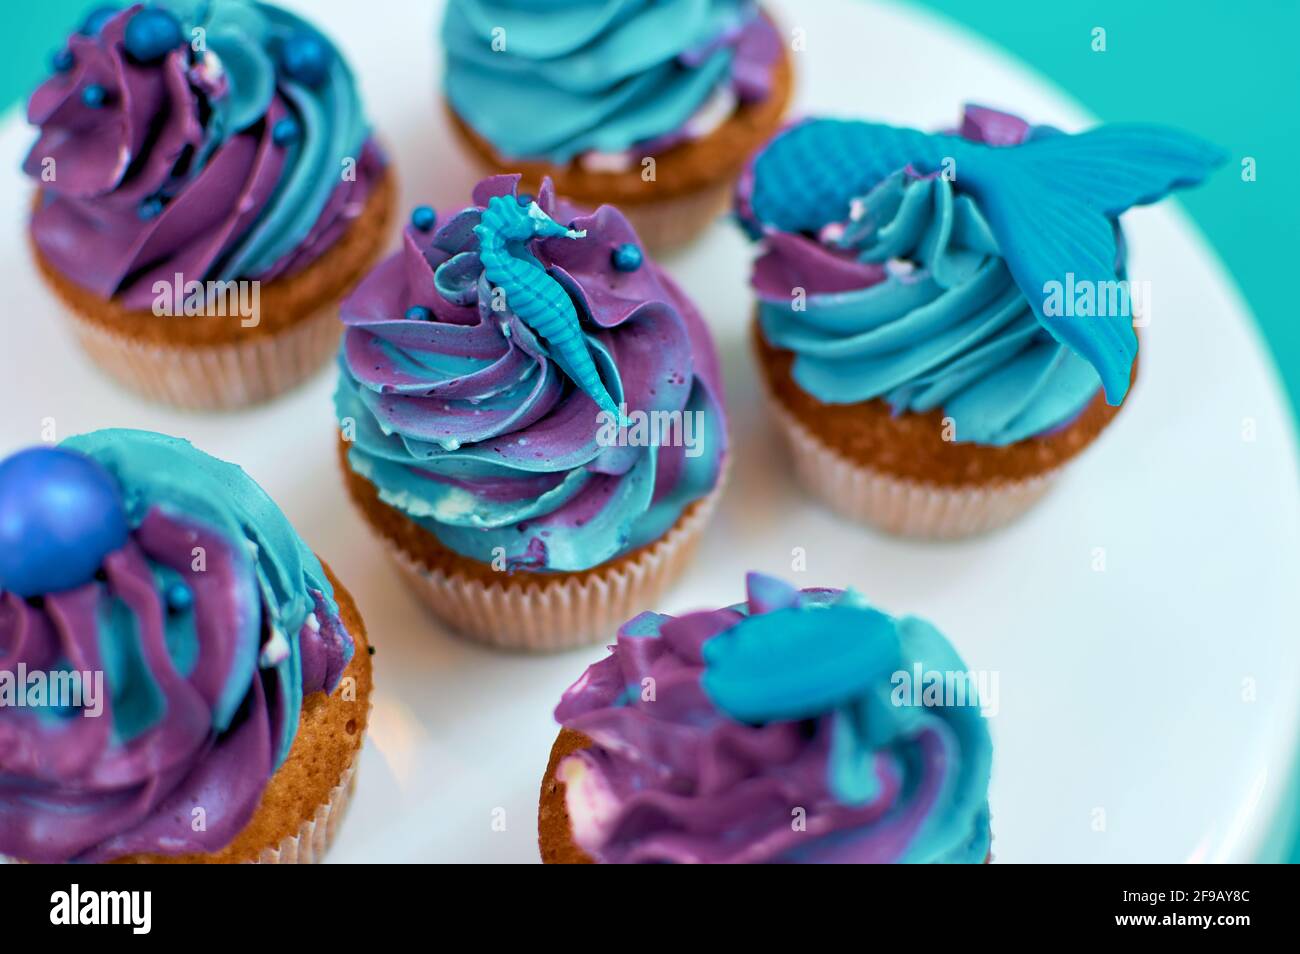 Cream muffins decorated with a nautical theme. Homemade cakes, blue and violet butter cream. Selective focus on decoration Stock Photo